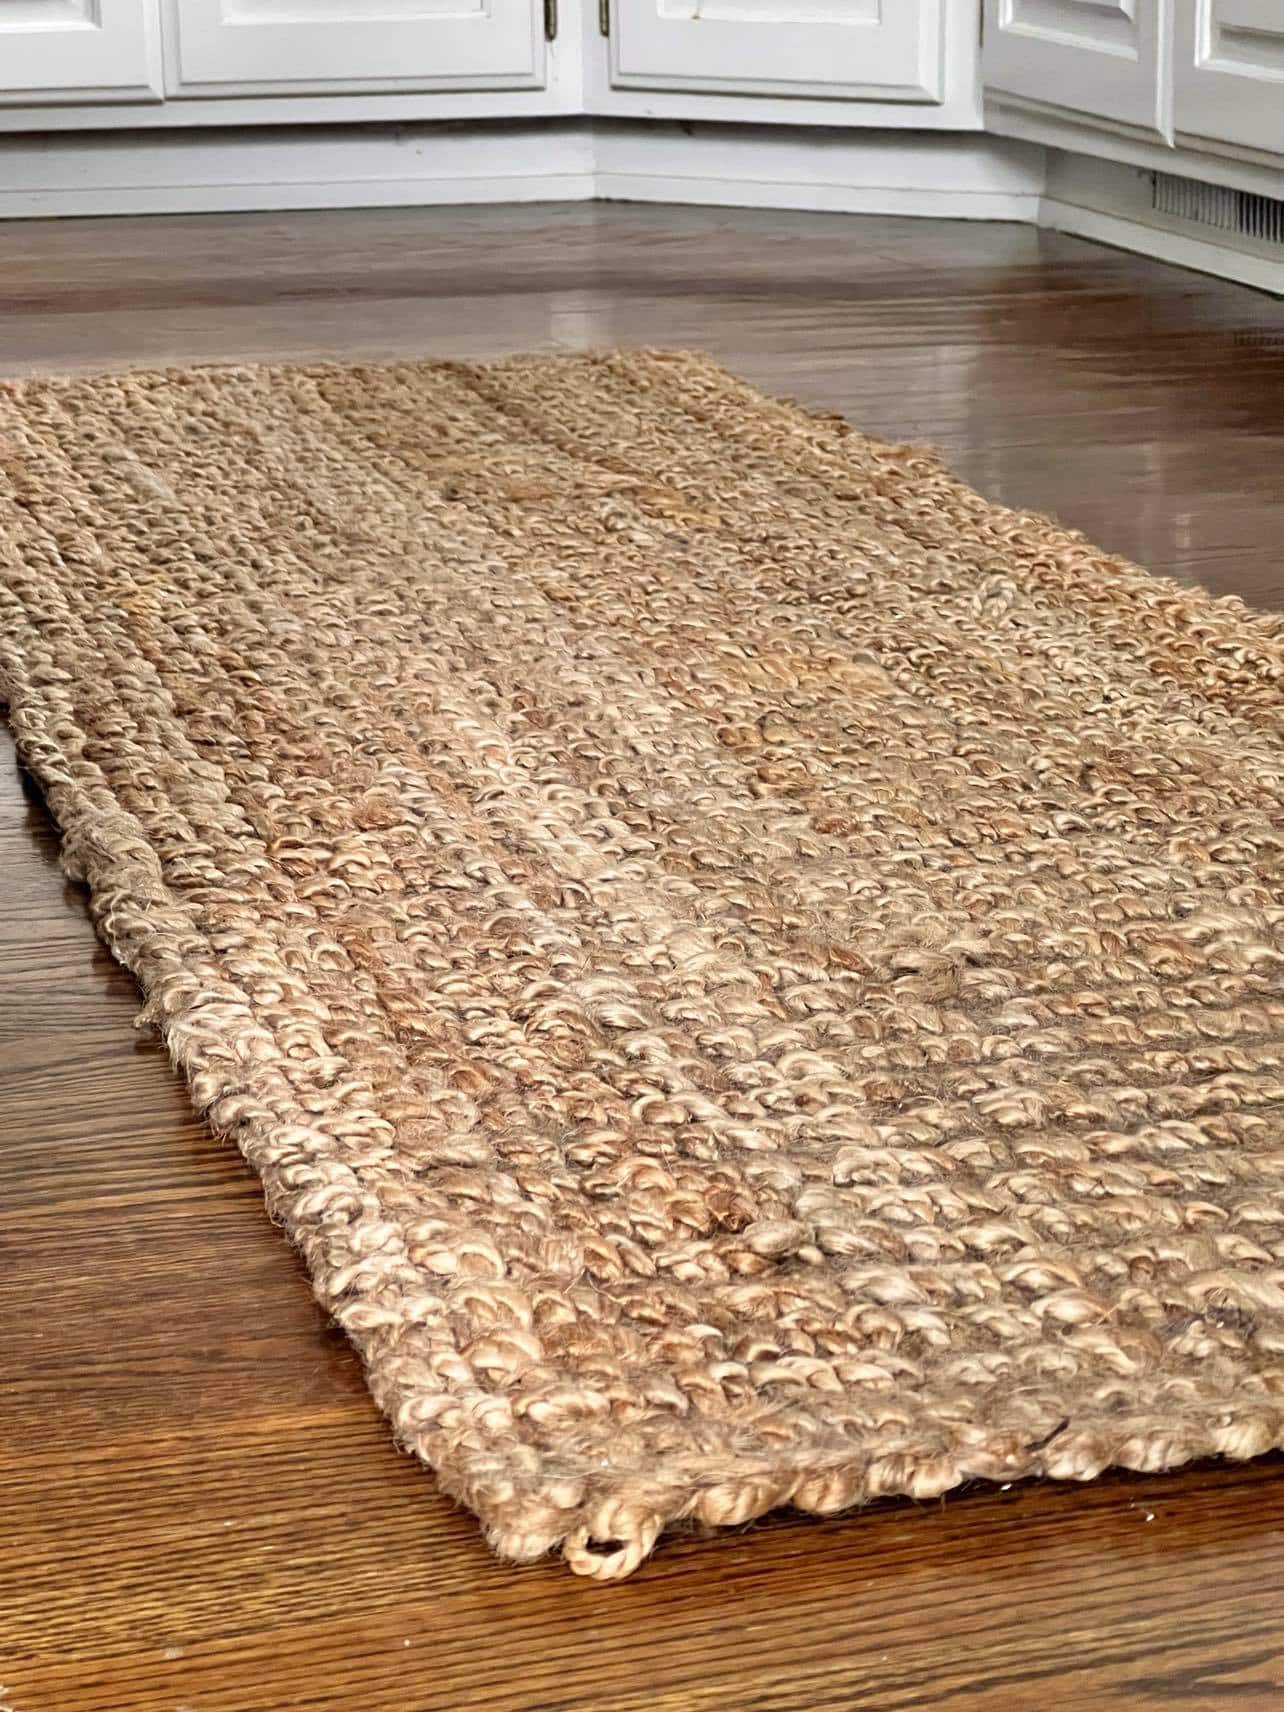 Jute Rug Care 101: How to Clean a Jute Rug with Ease